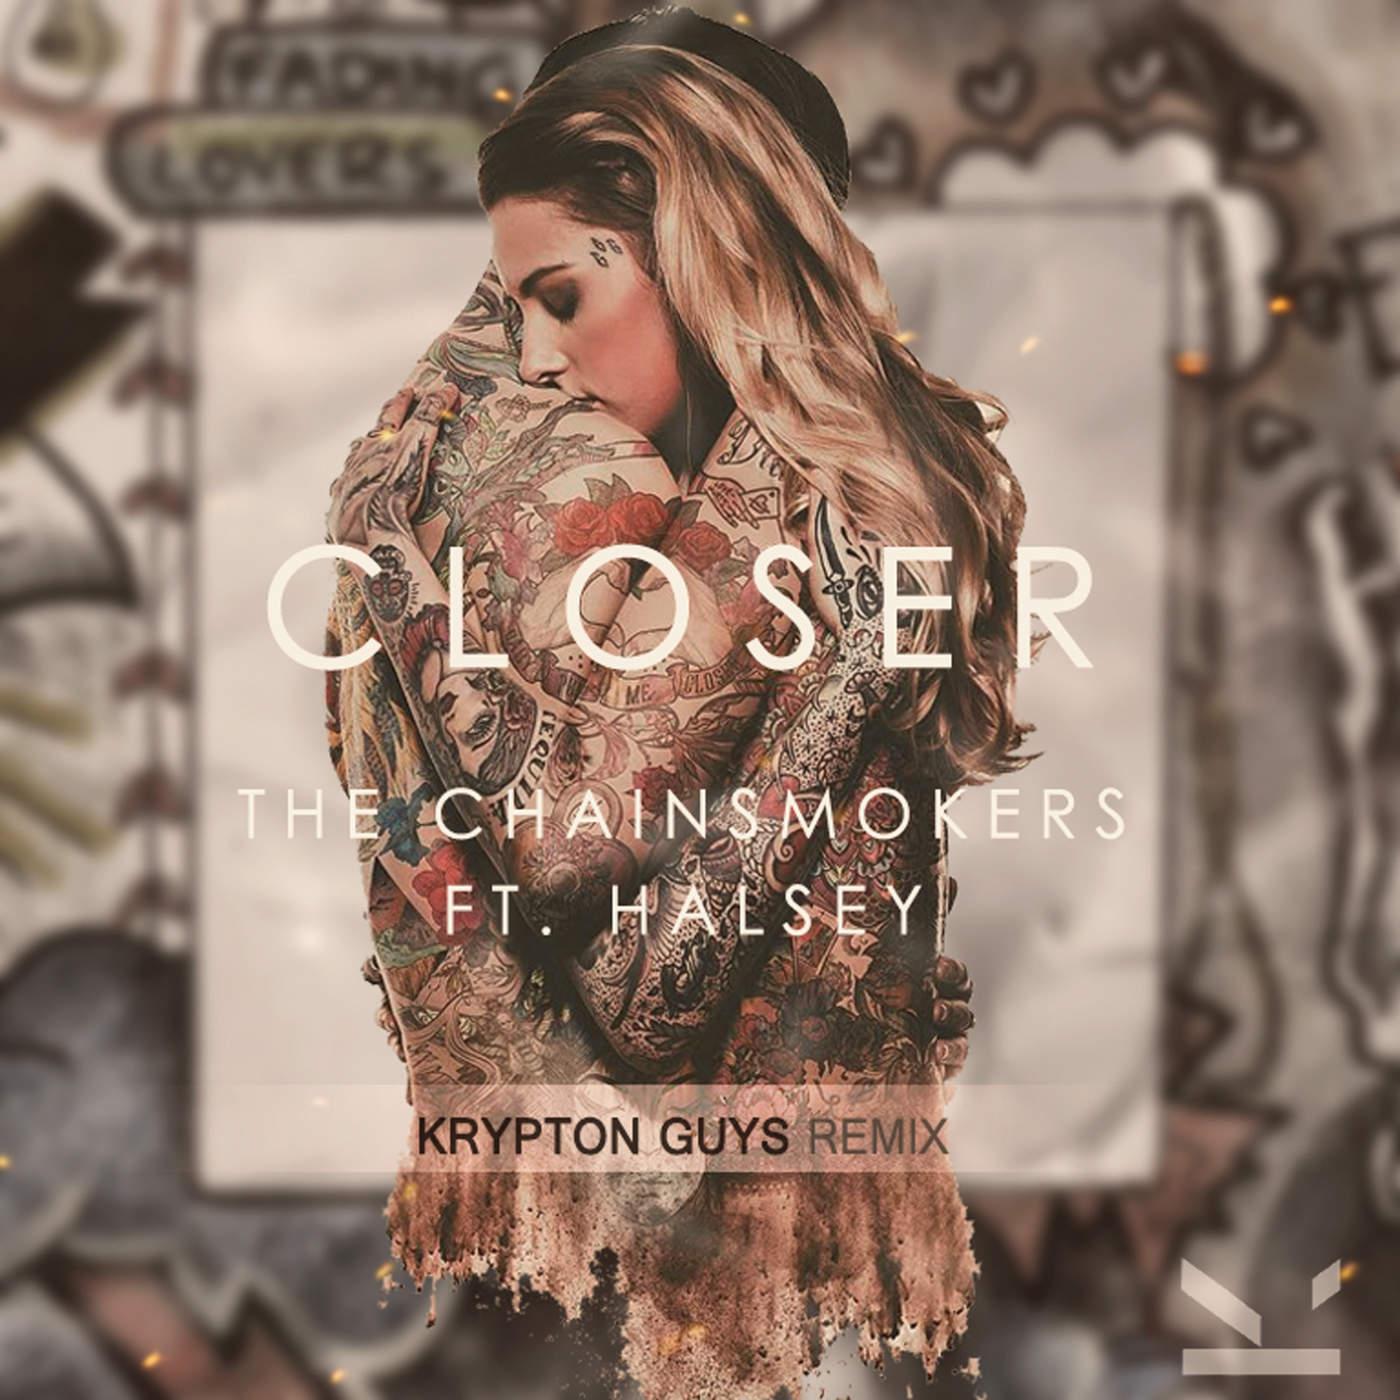 download song closer by the chainsmokers